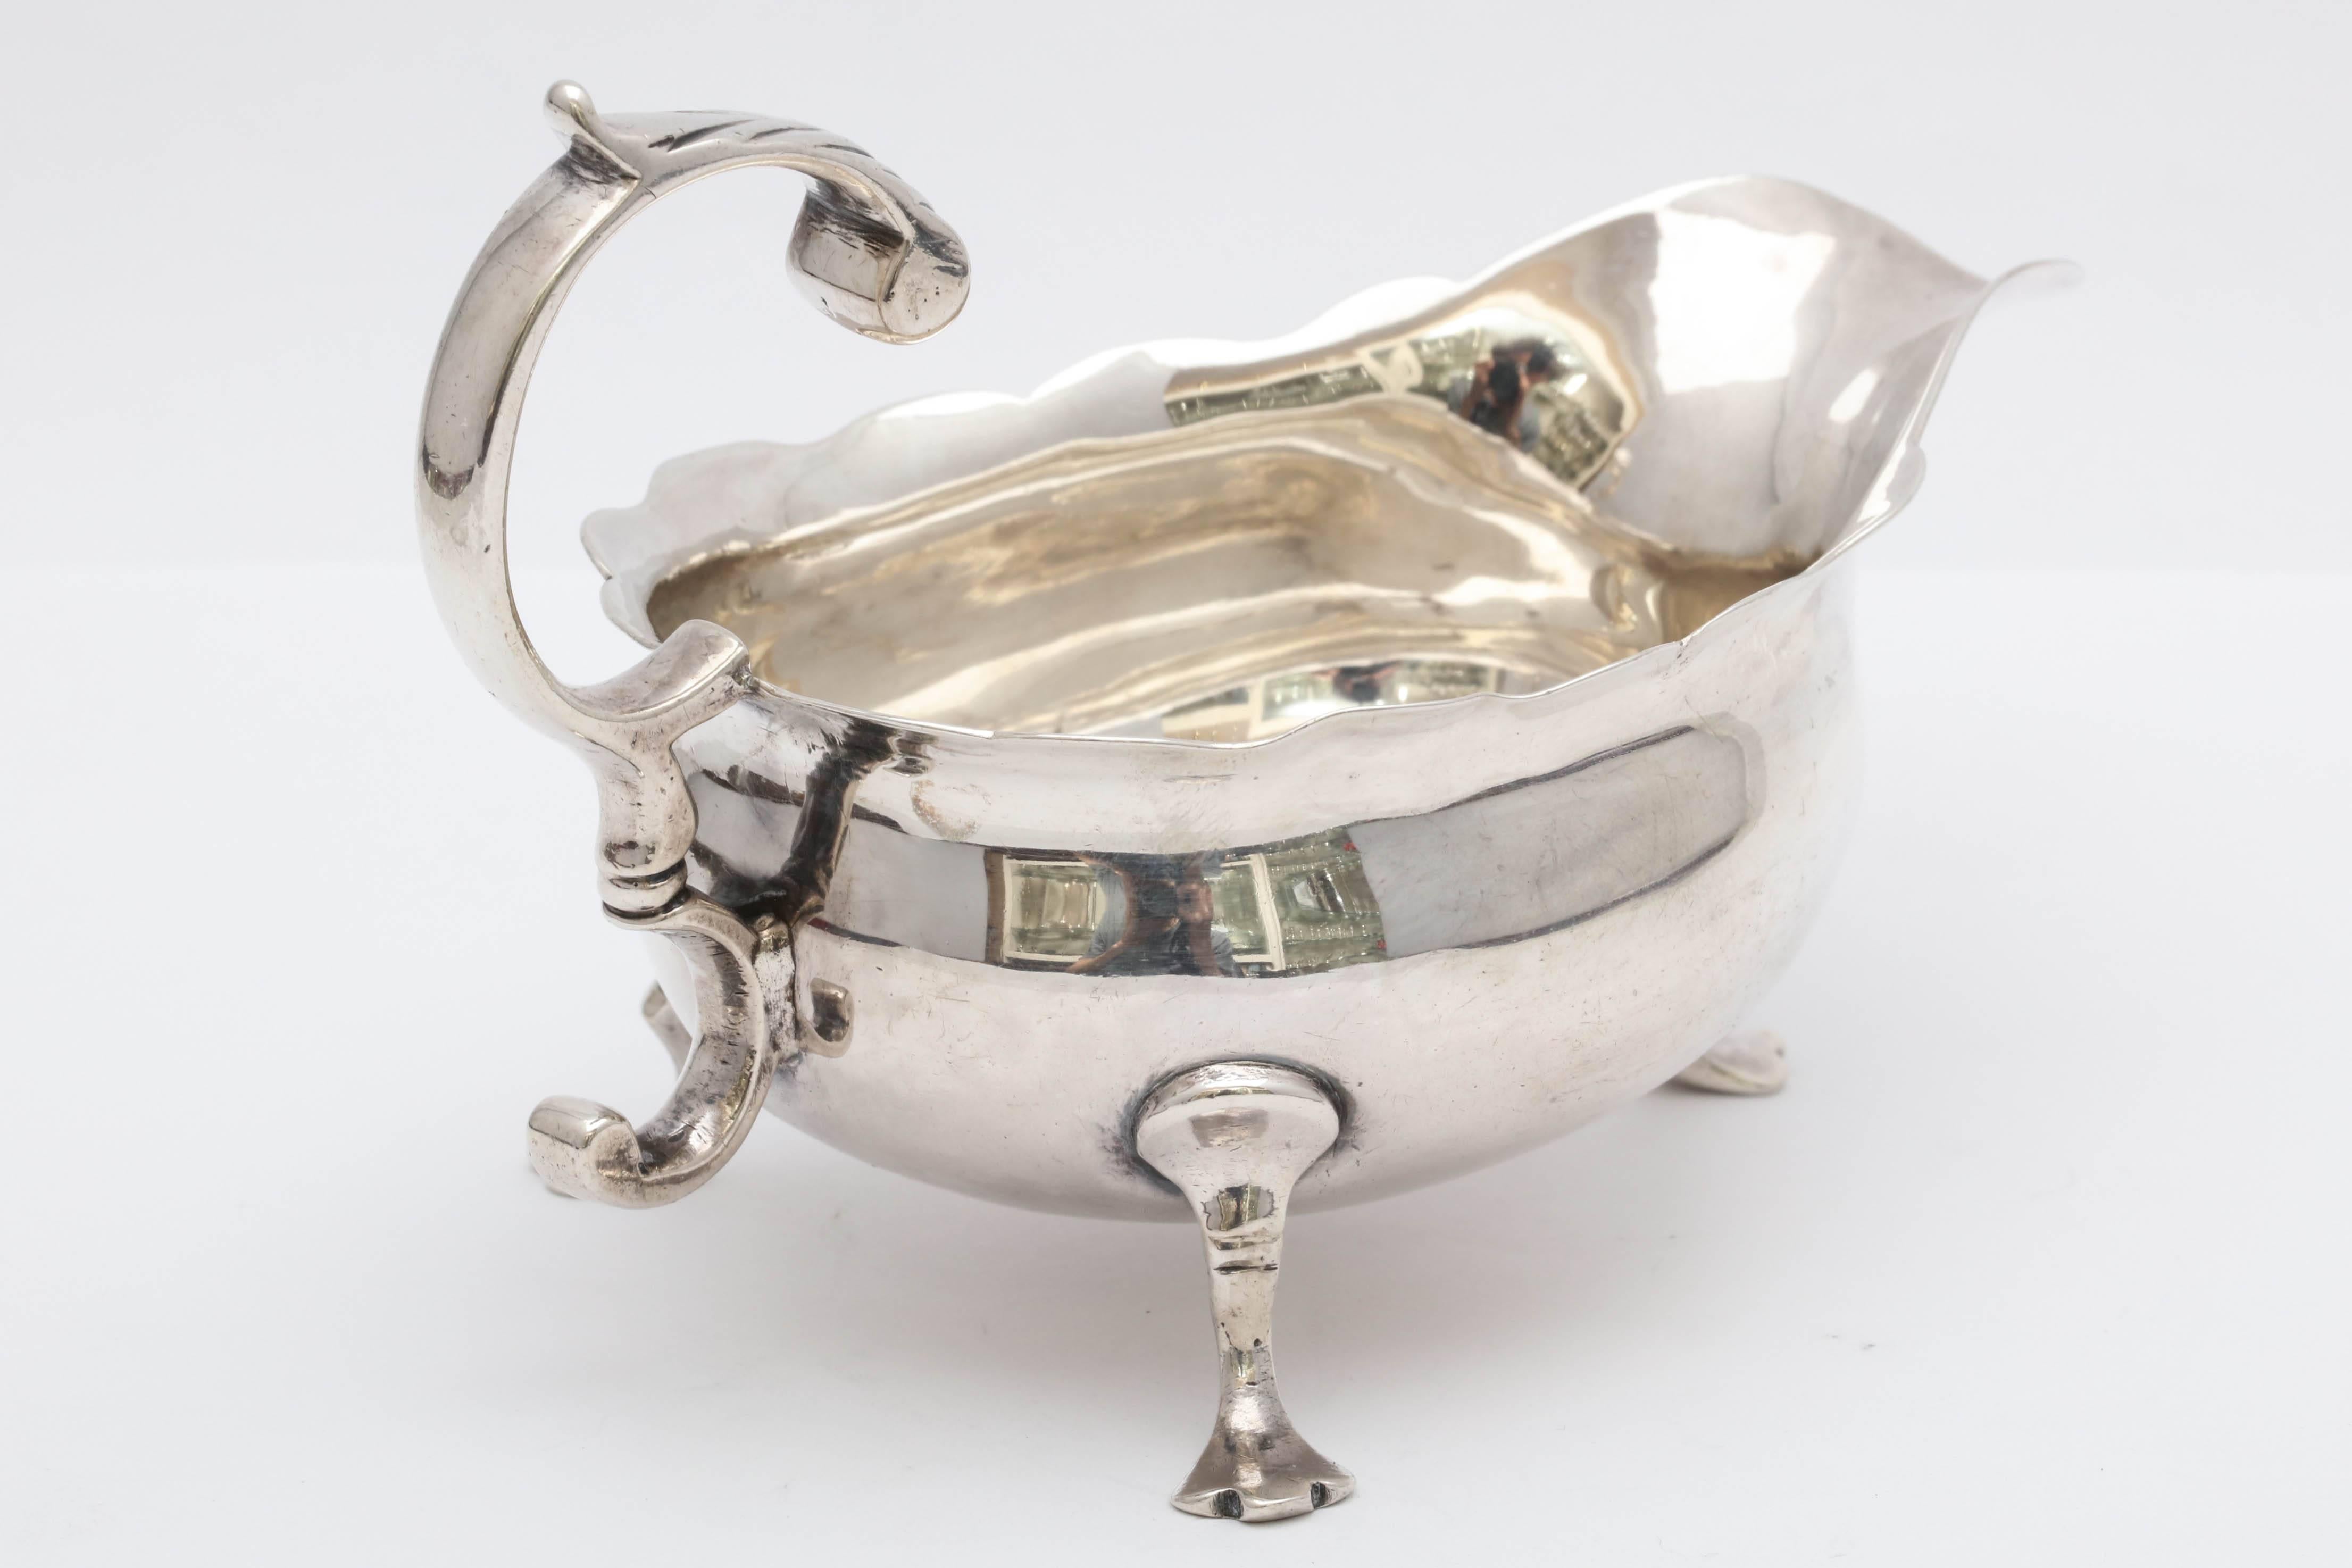 Sterling silver, paw-footed, Georgian - George II - sauce/ gravy boat, London, 1753. Measures 5 inches (from edge of handle to edge of spout) x 3 inches deep at deepest point (from back foot to back foot) x 3 1/4 inches high at highest point. Weighs